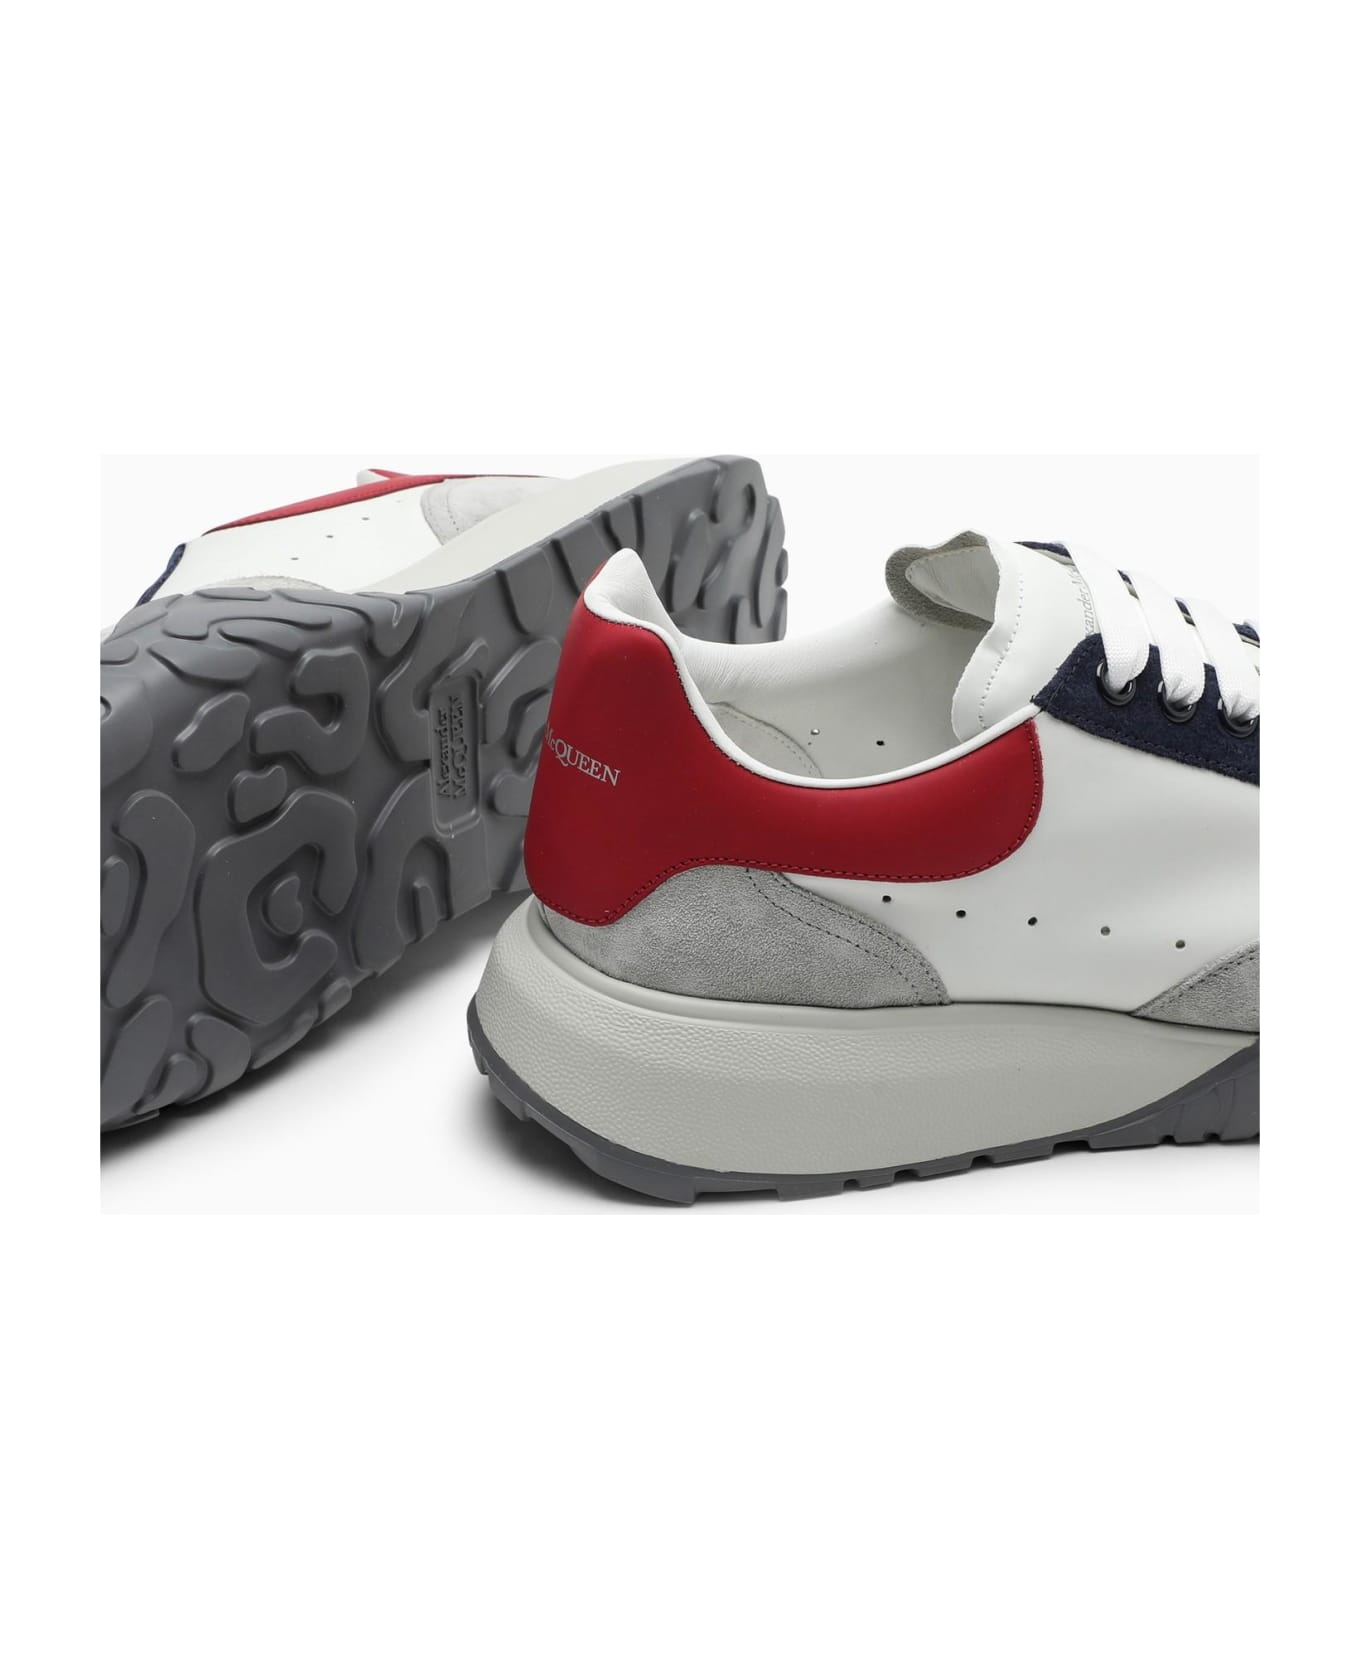 Alexander McQueen White\/red Court Trainer Sneakers - W/t.g/w.r/w/d.m/m./l